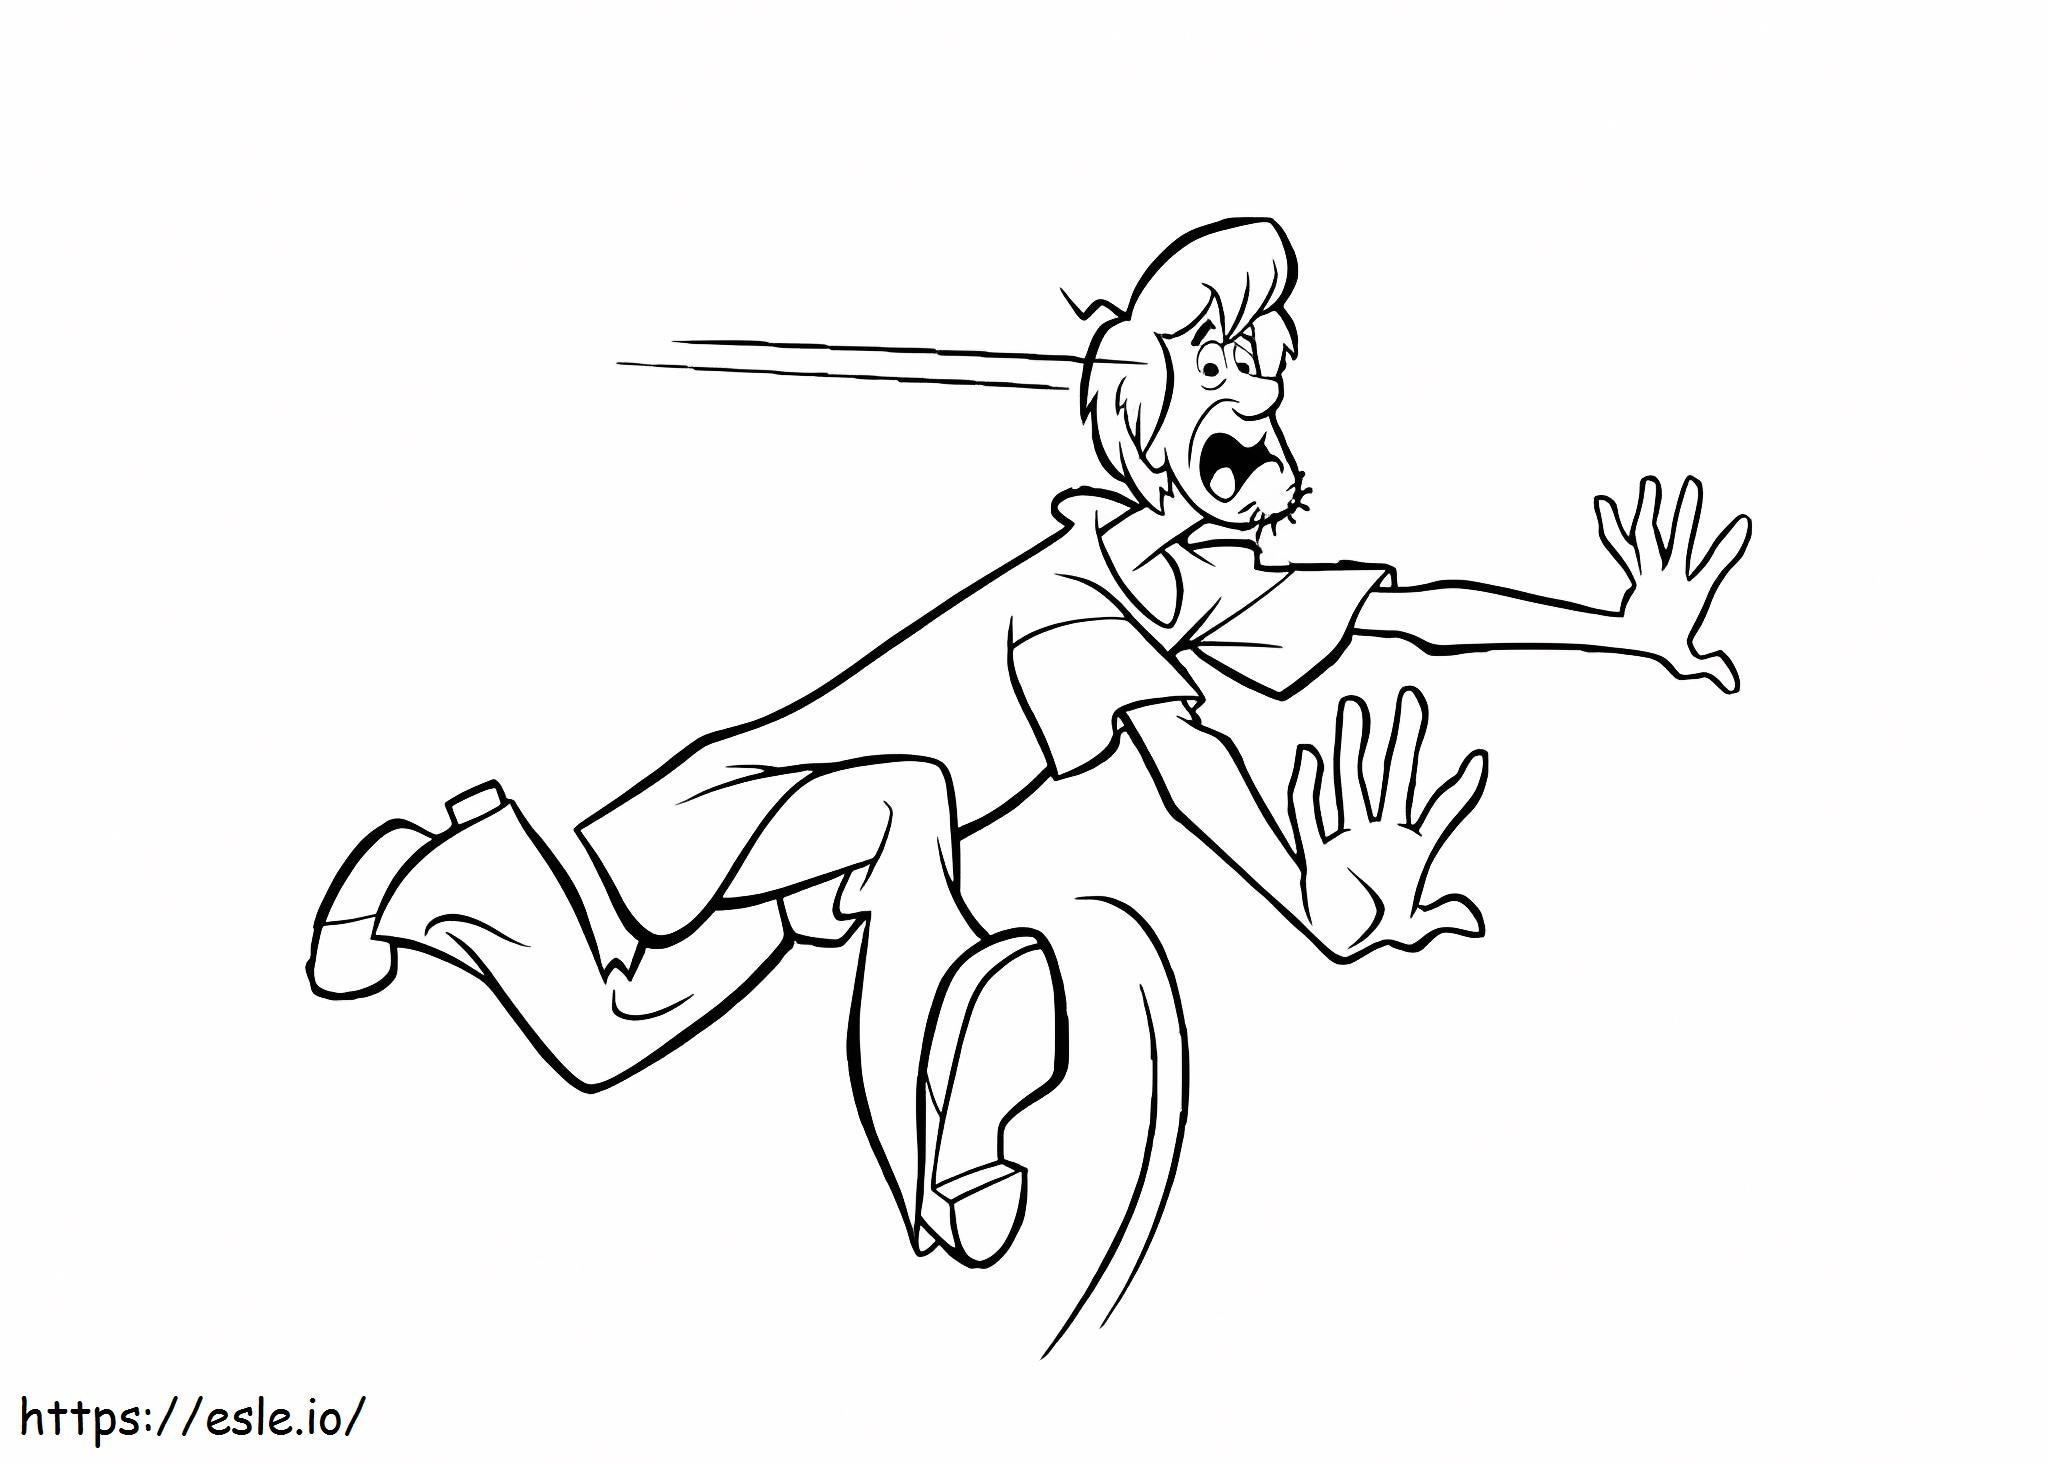 Scared Shaggy Running coloring page